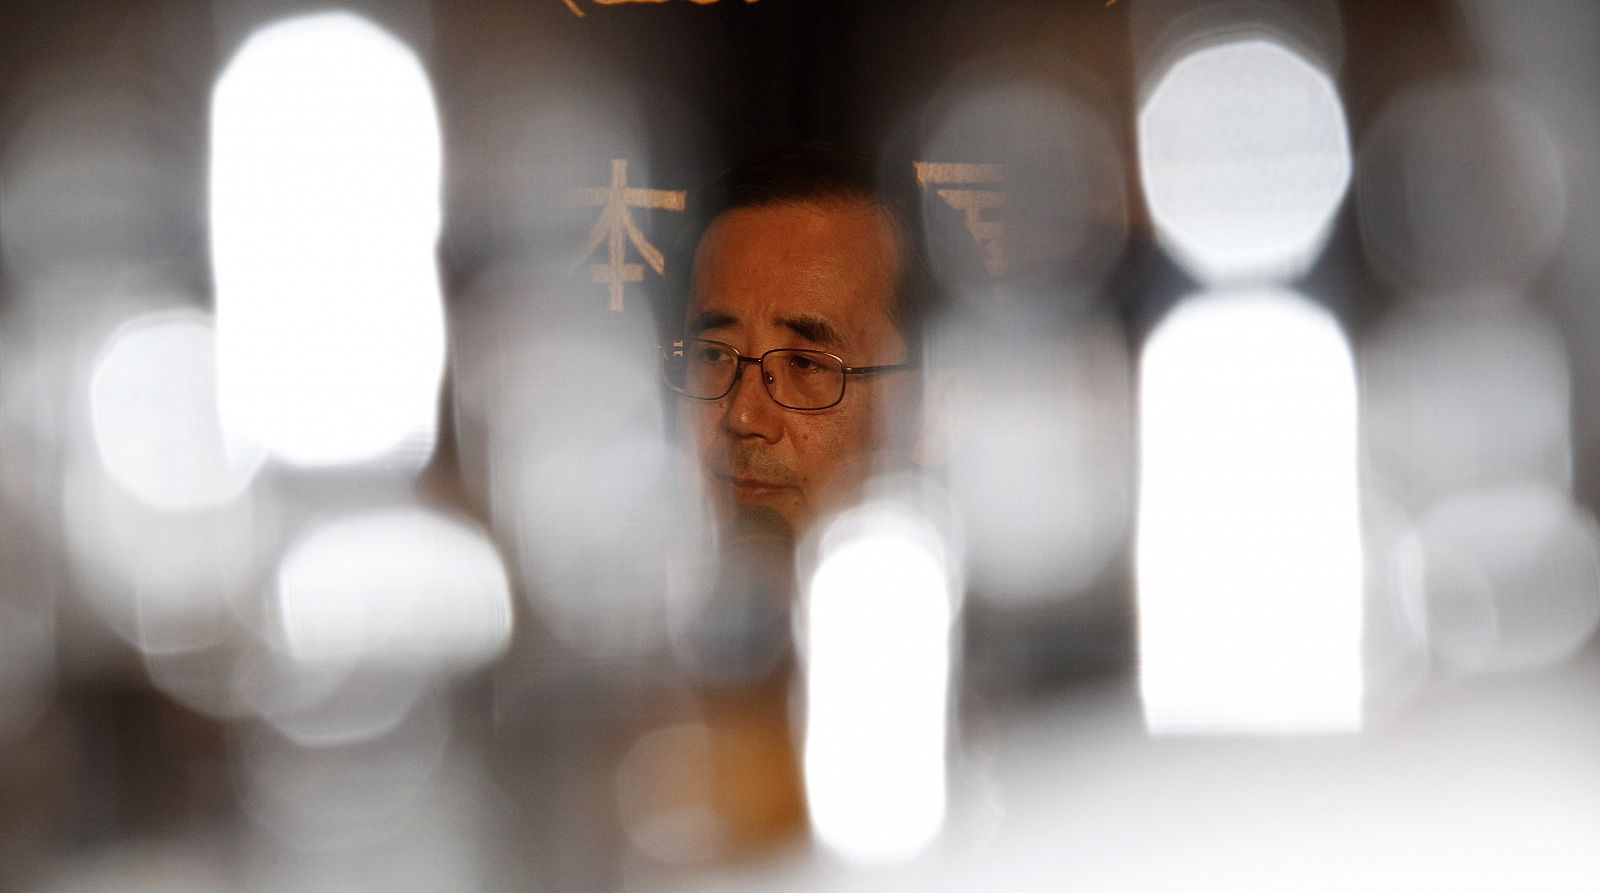 Bank of Japan Governor Masaaki Shirakawa is seen through reflections on glasses during a news conference in Tokyo